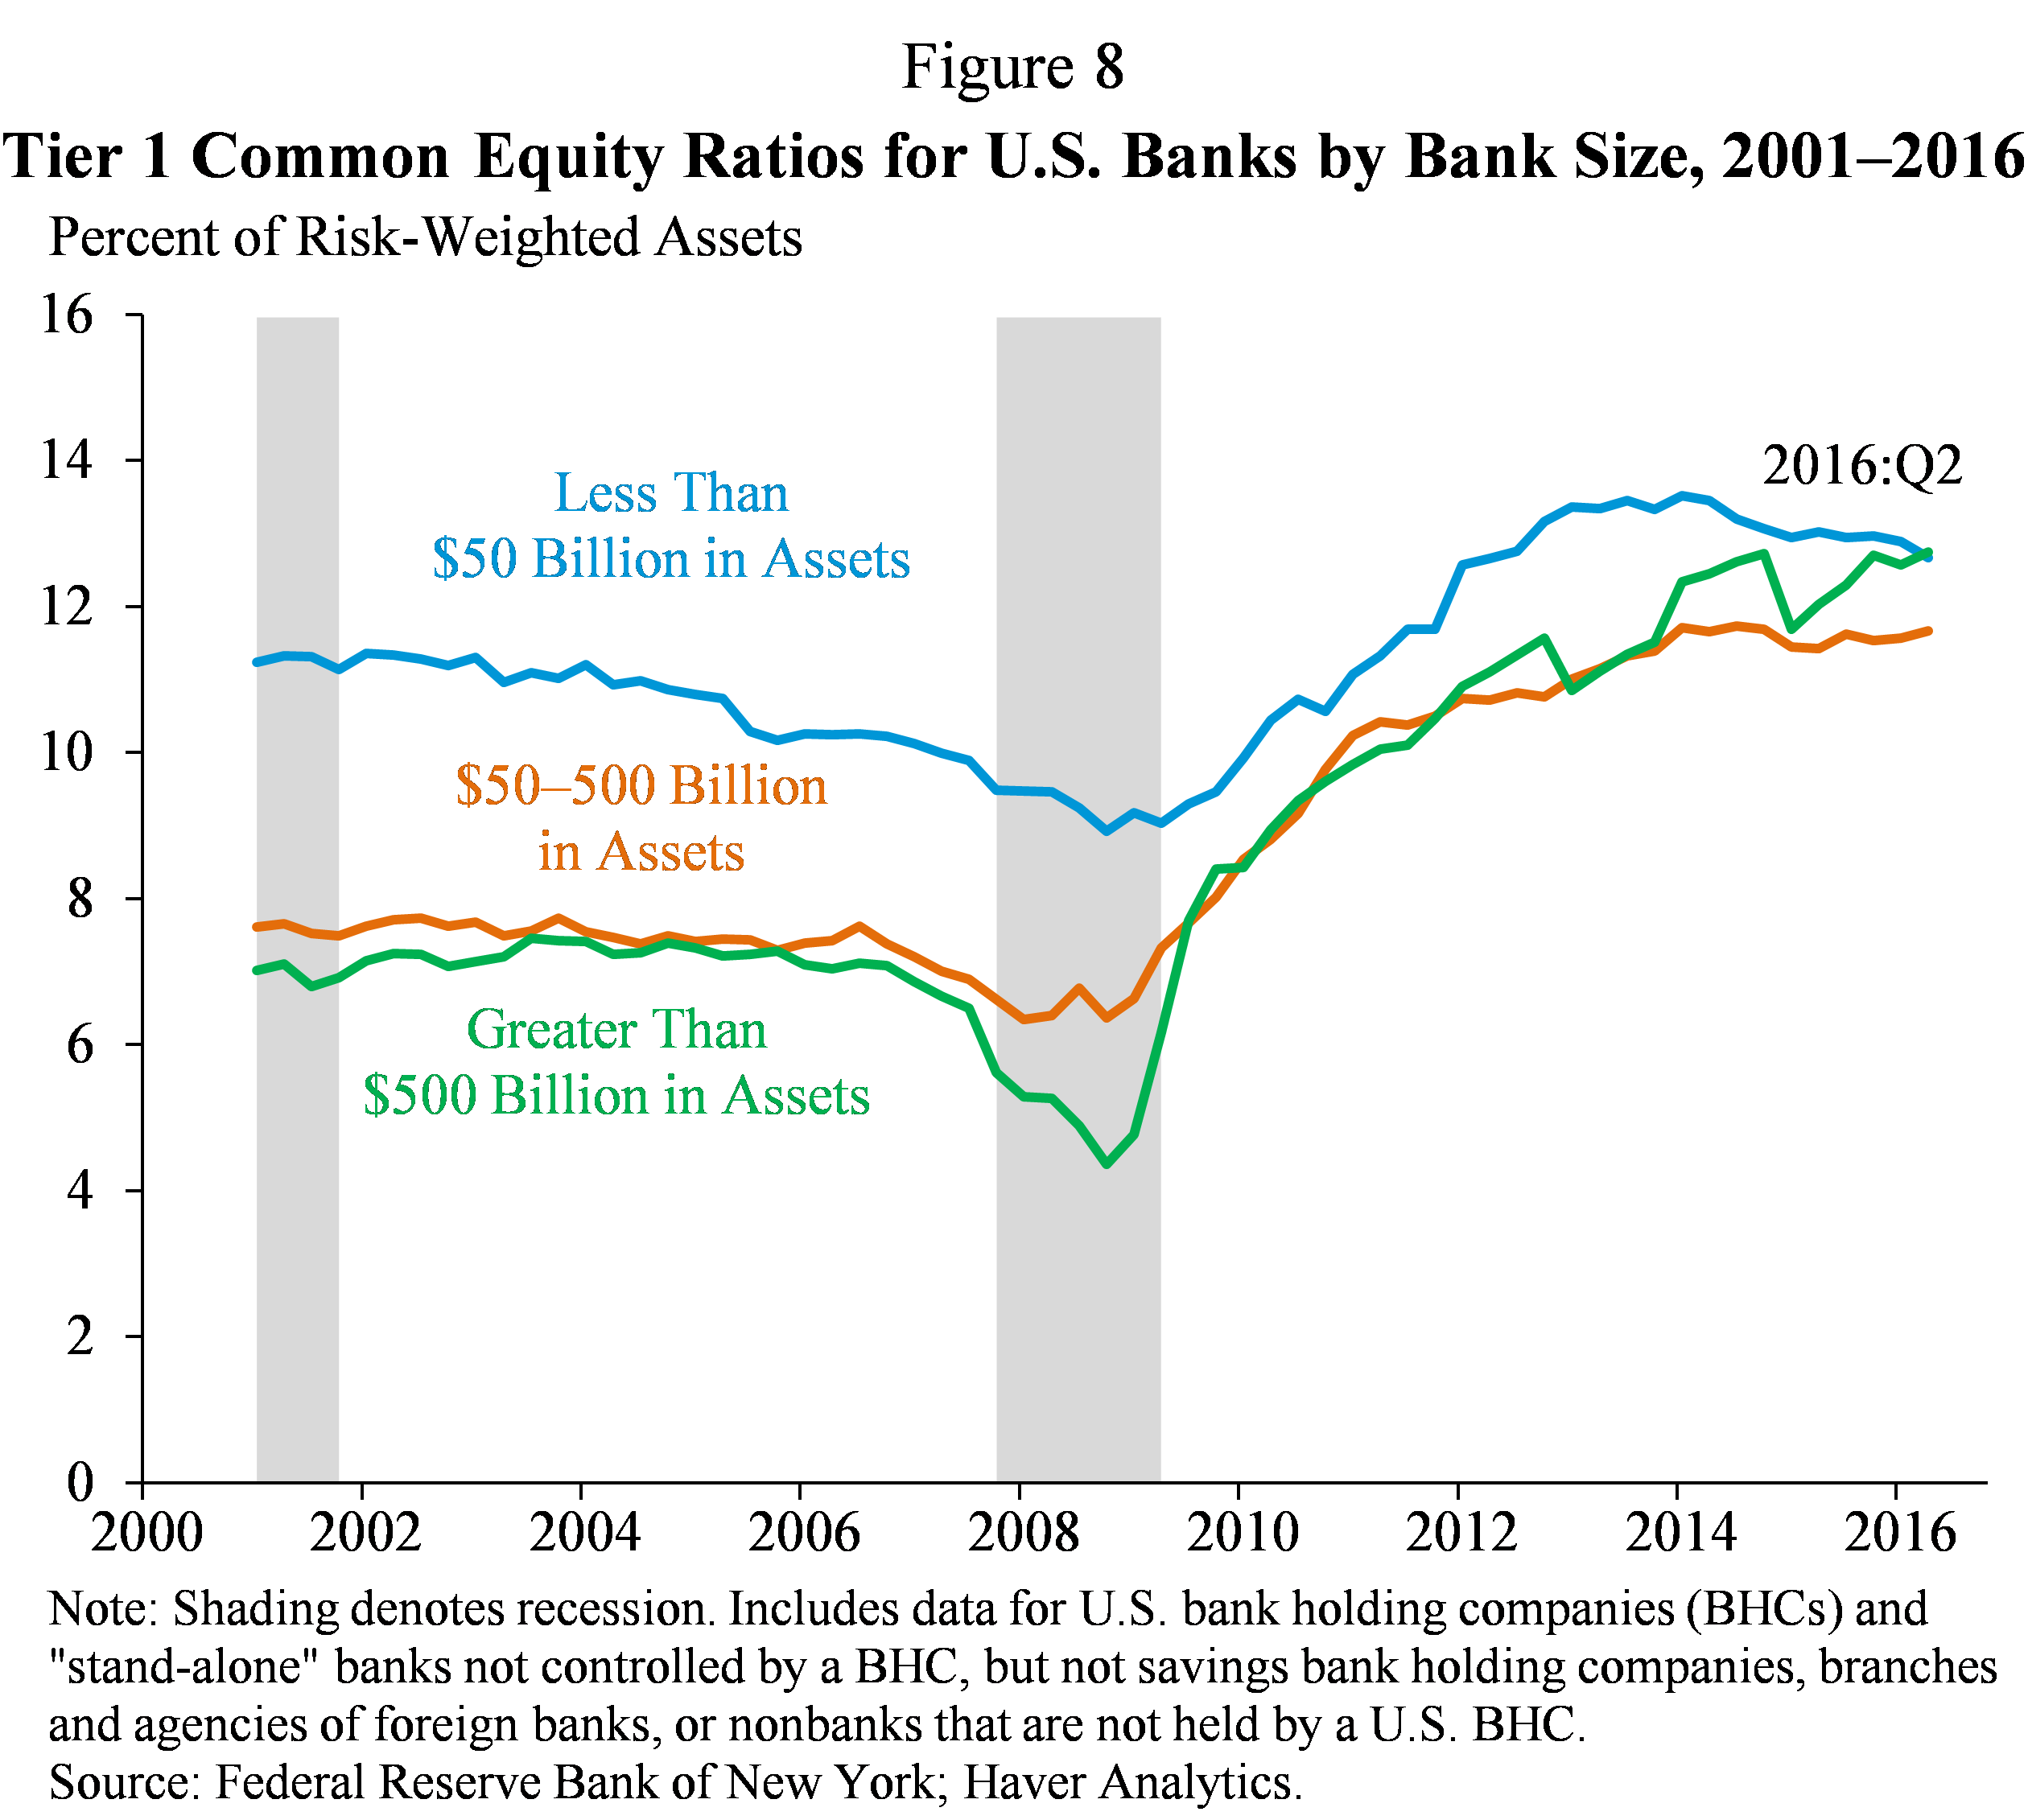 Figure 8.  Tier 1 Common Equity Ratios for U.S. Banks by Bank Size, 2001-2006